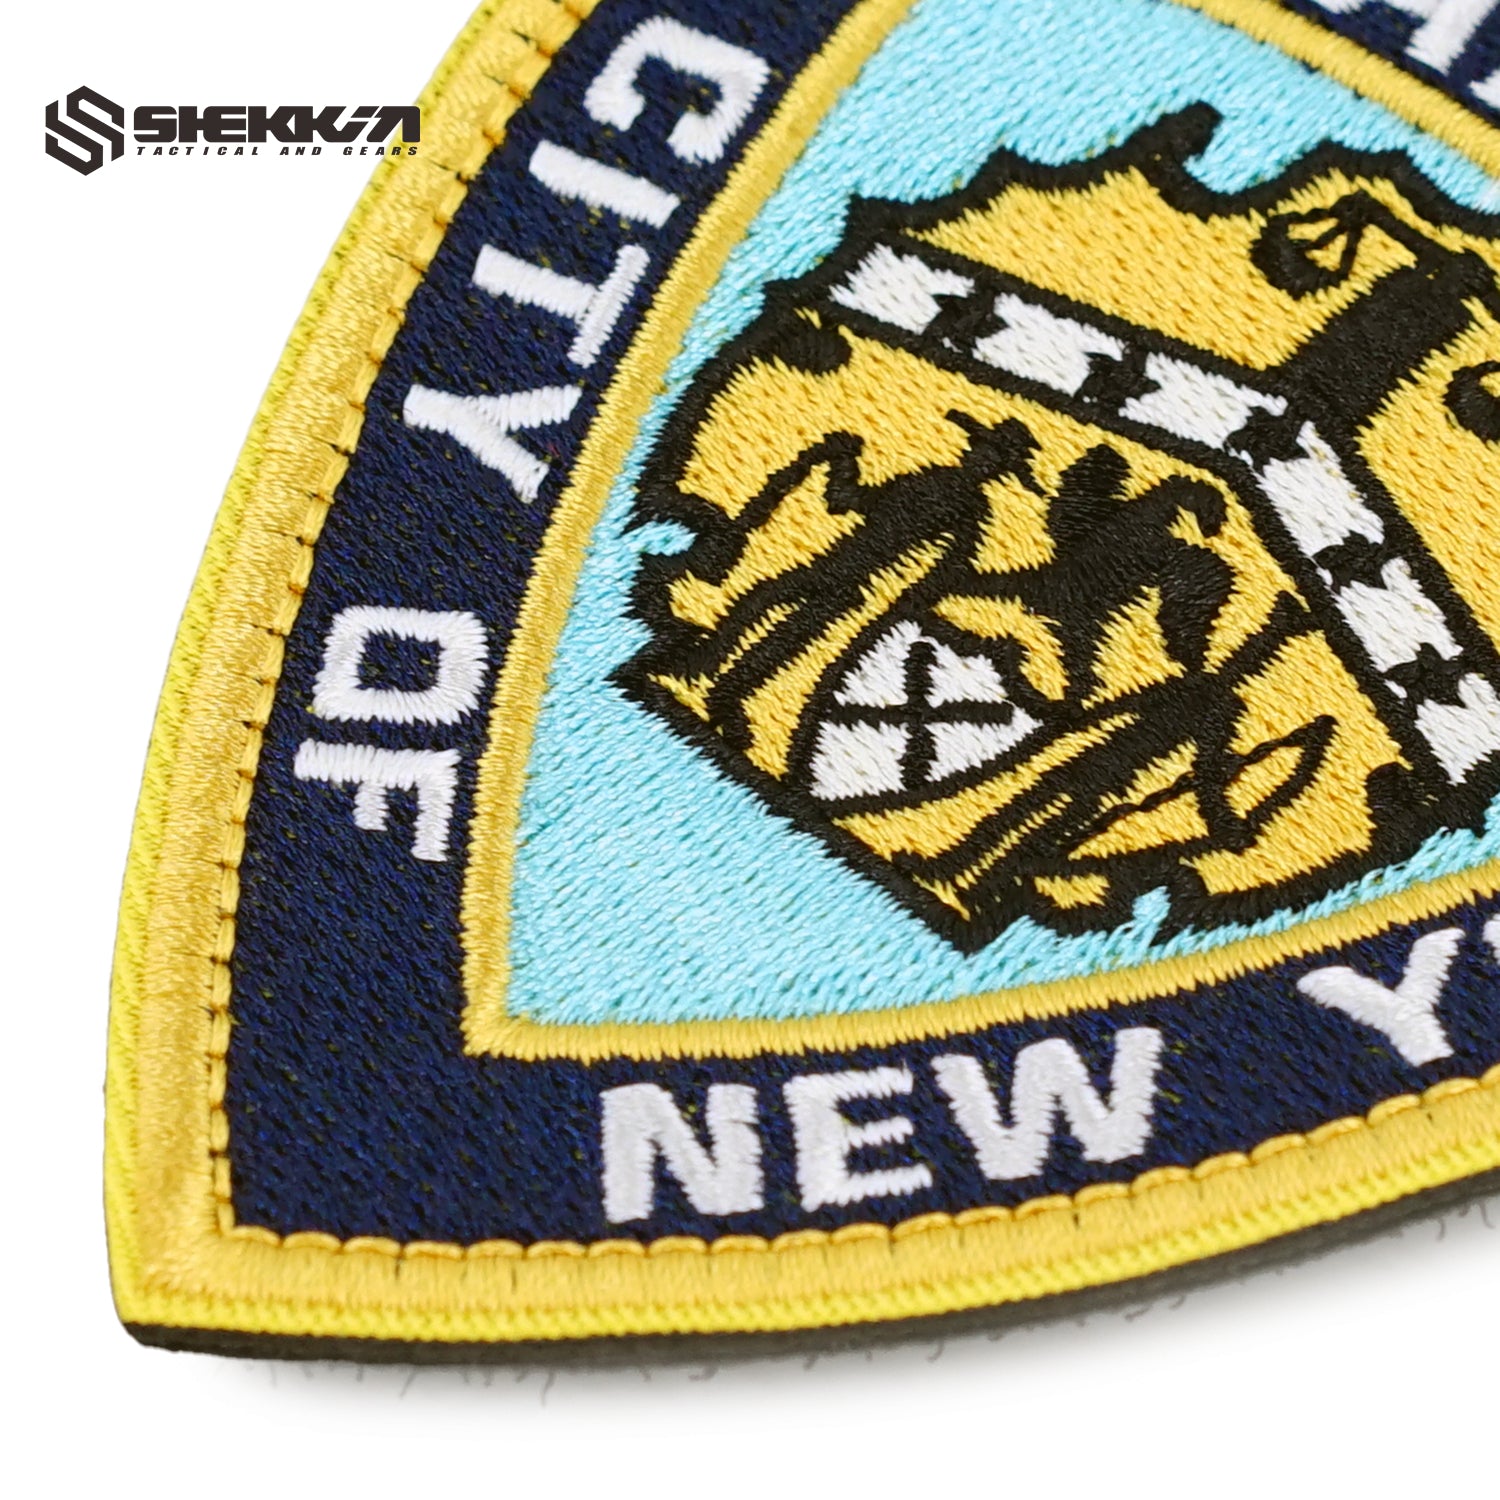 Delta force CAG NYPD patch - Shekkin Gears